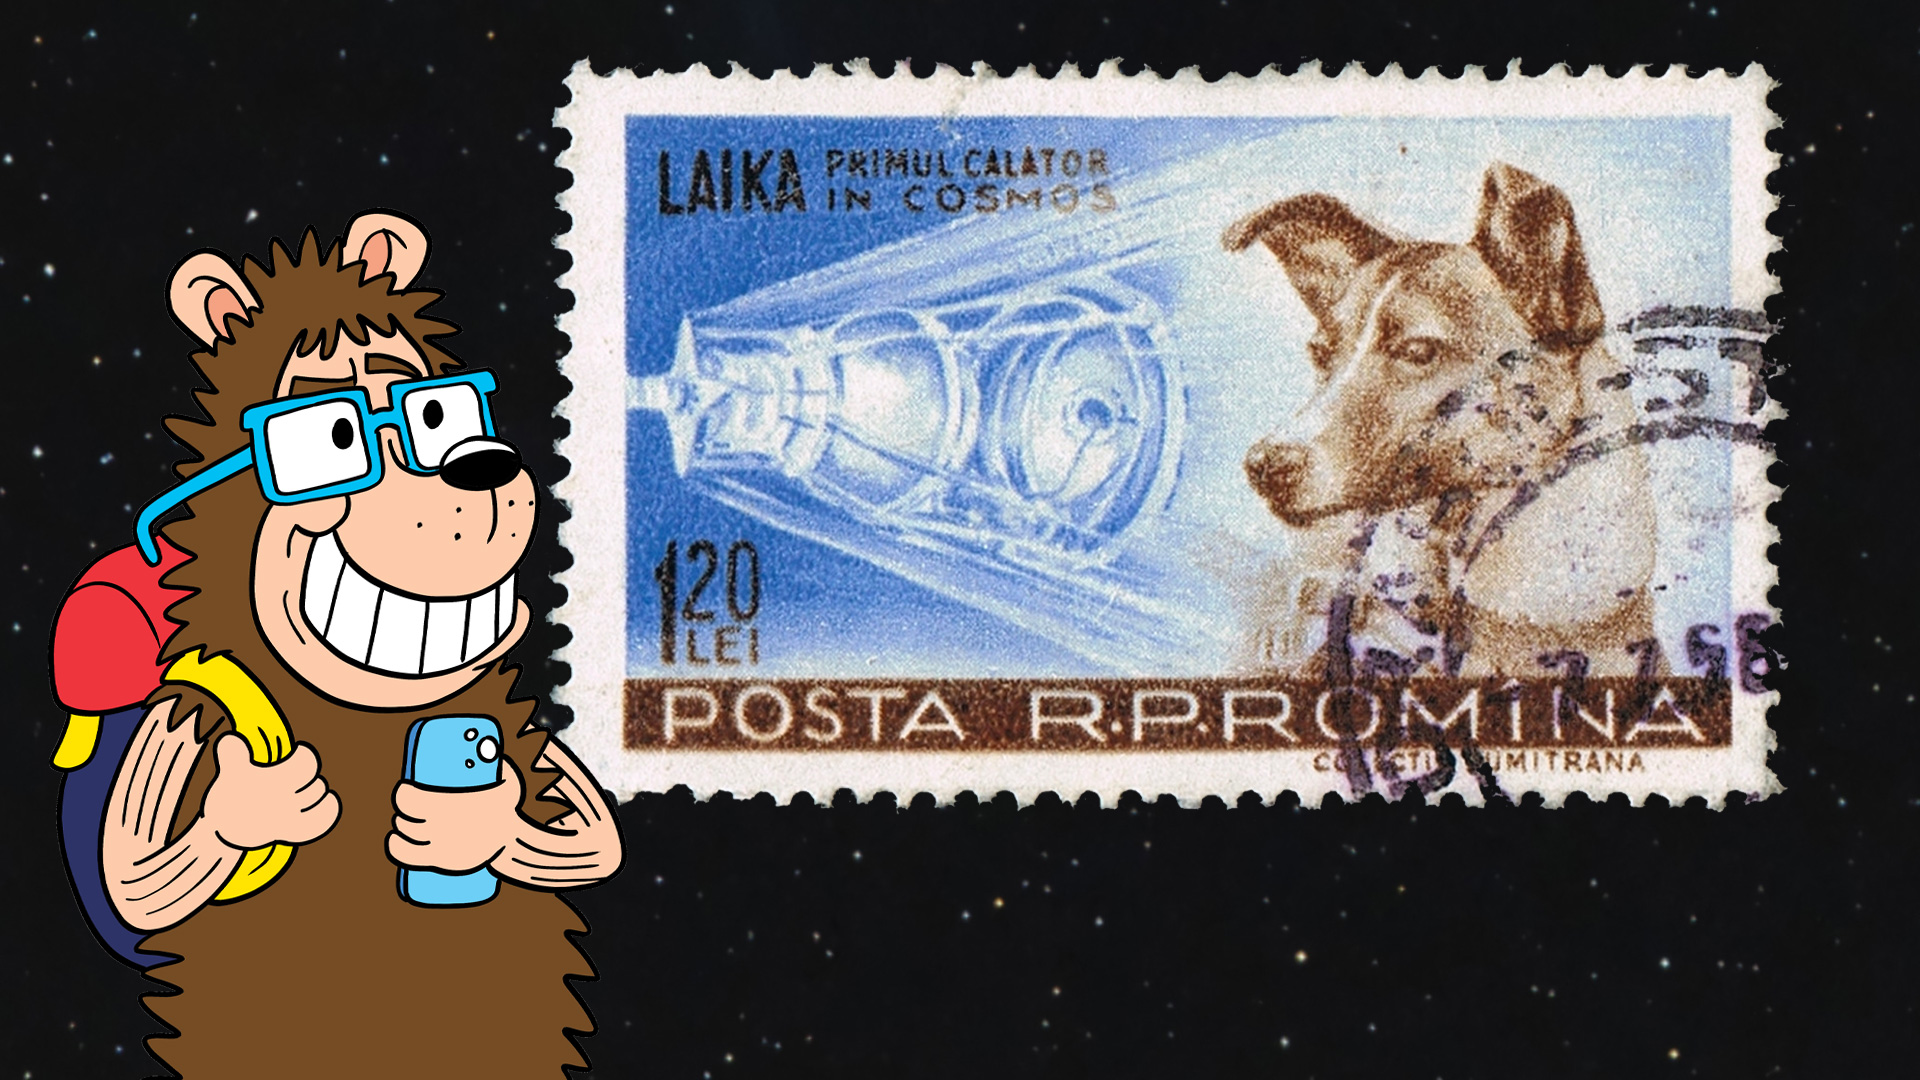 A stamp featuring Laika - the first living creature in space